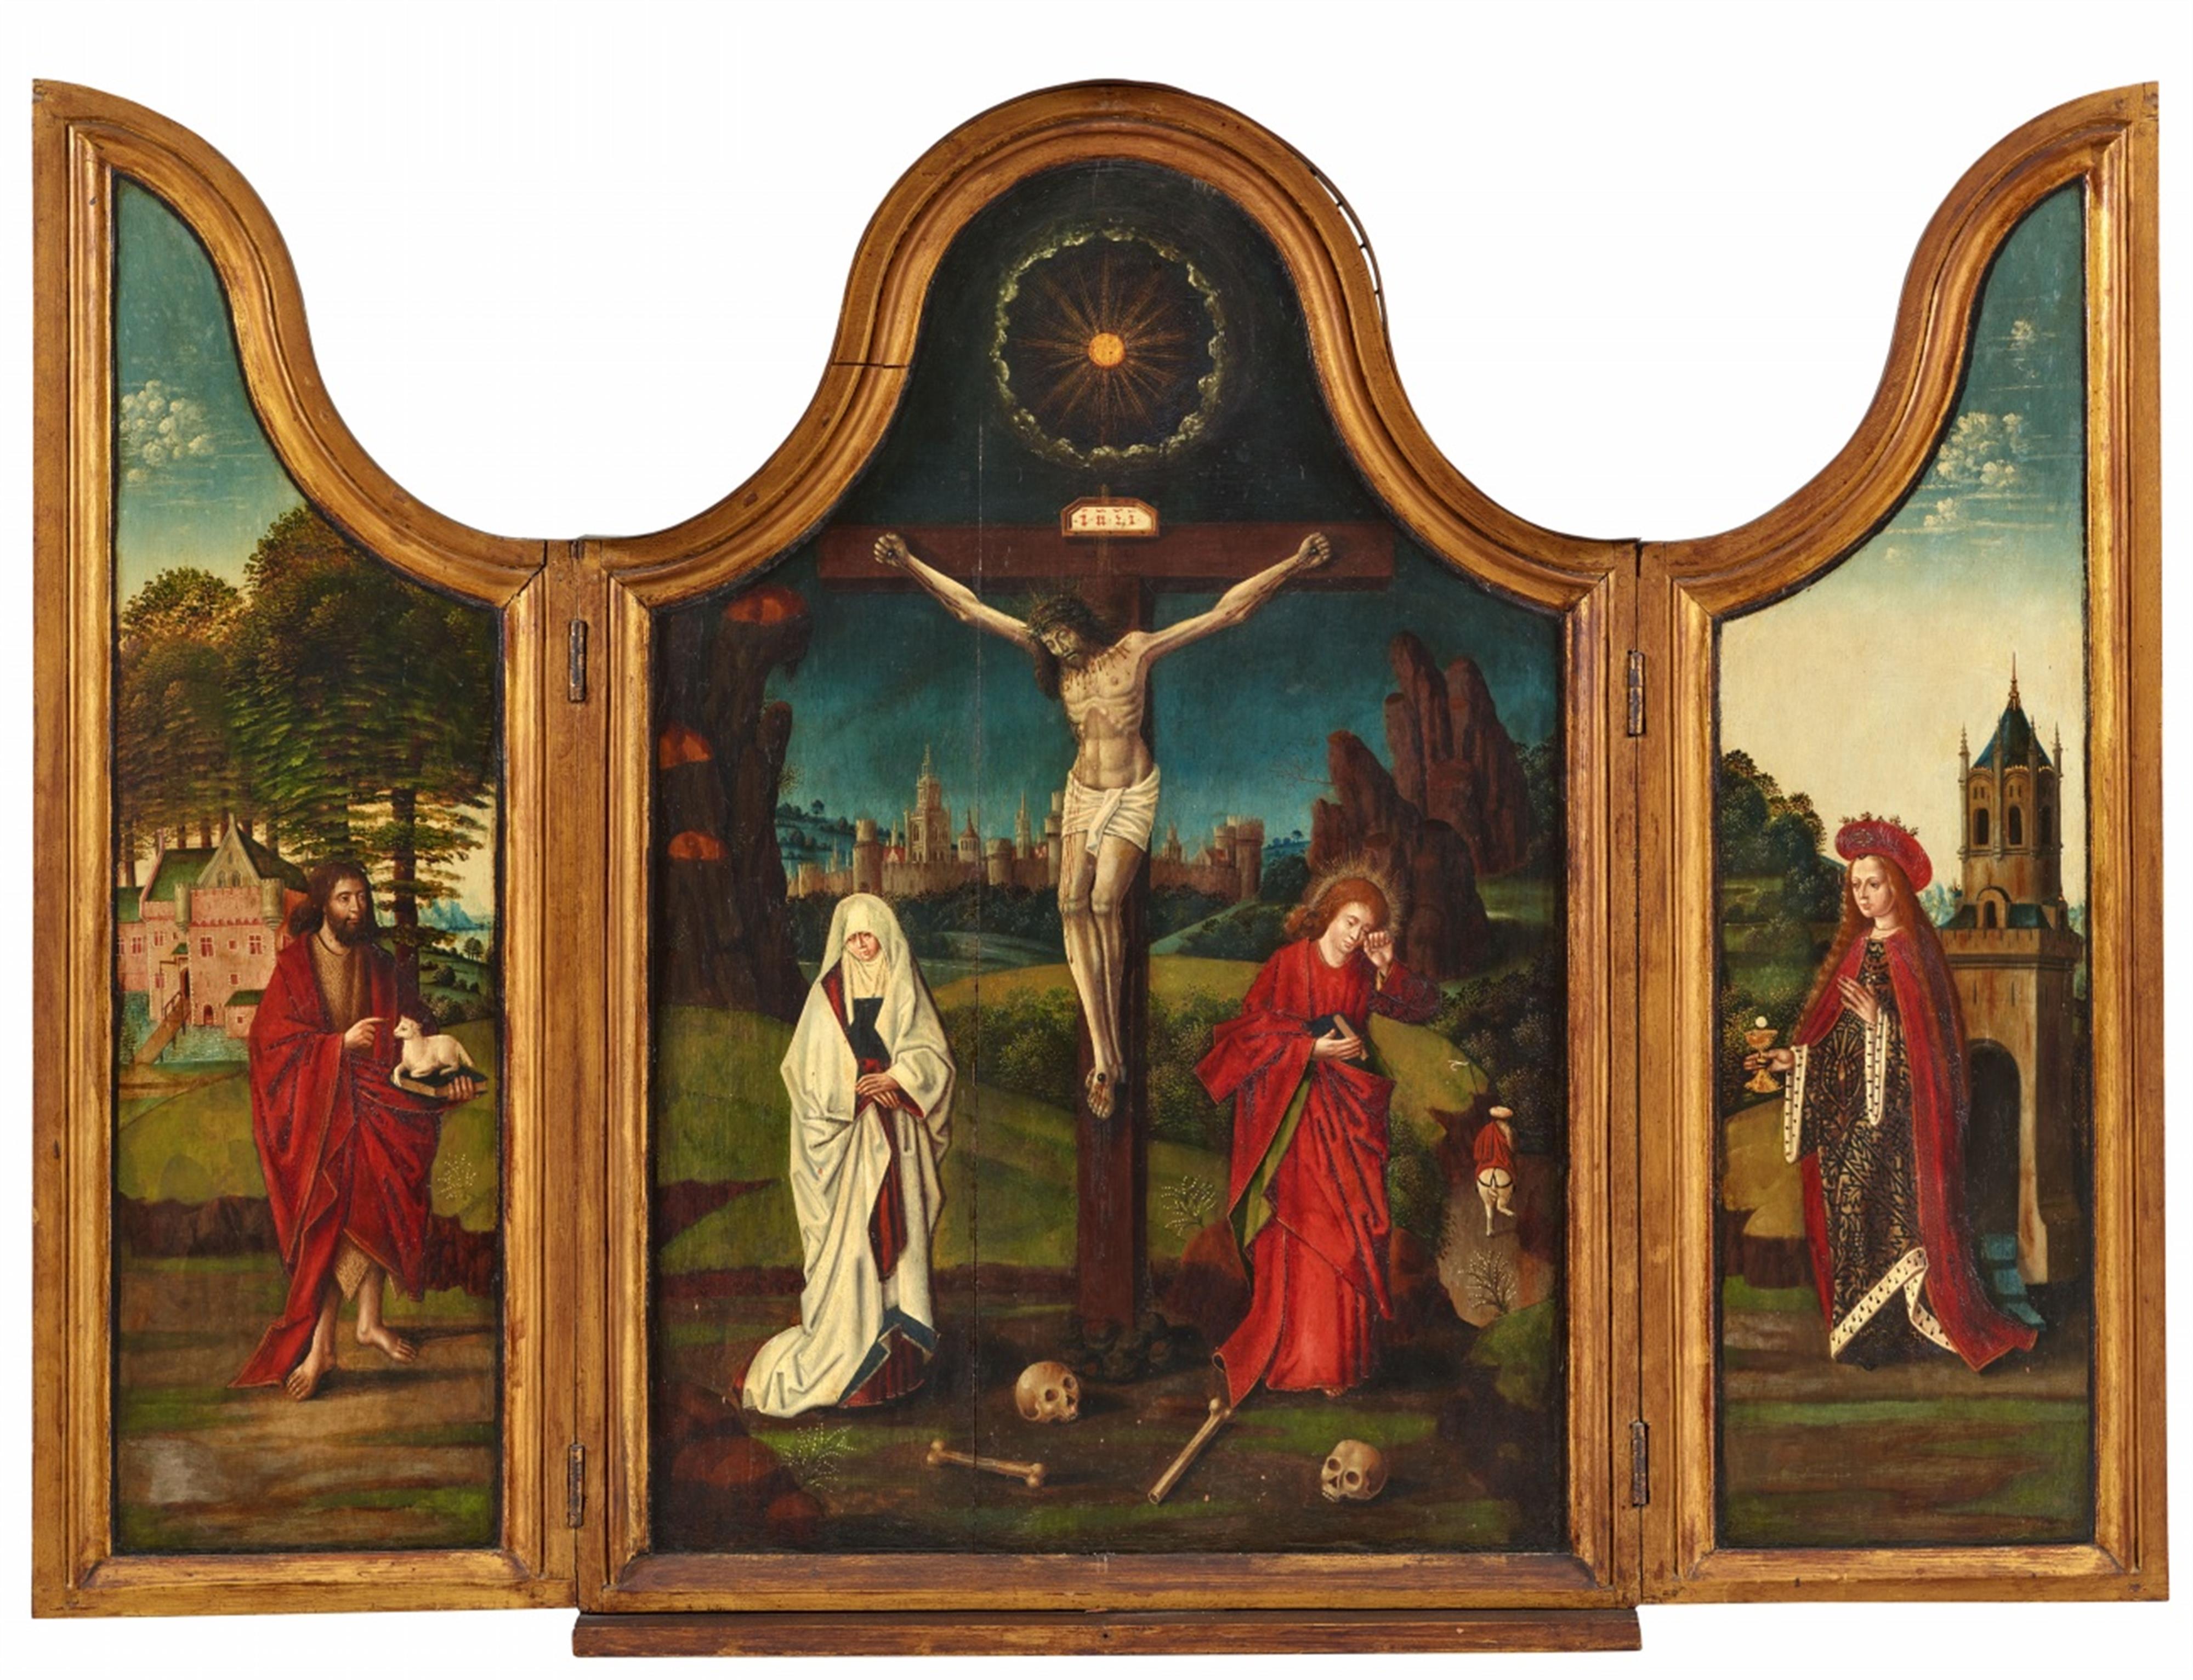 Bruges School around 1500 - Triptych with the Crucifixion, John the Baptist and St. Barbara - image-1